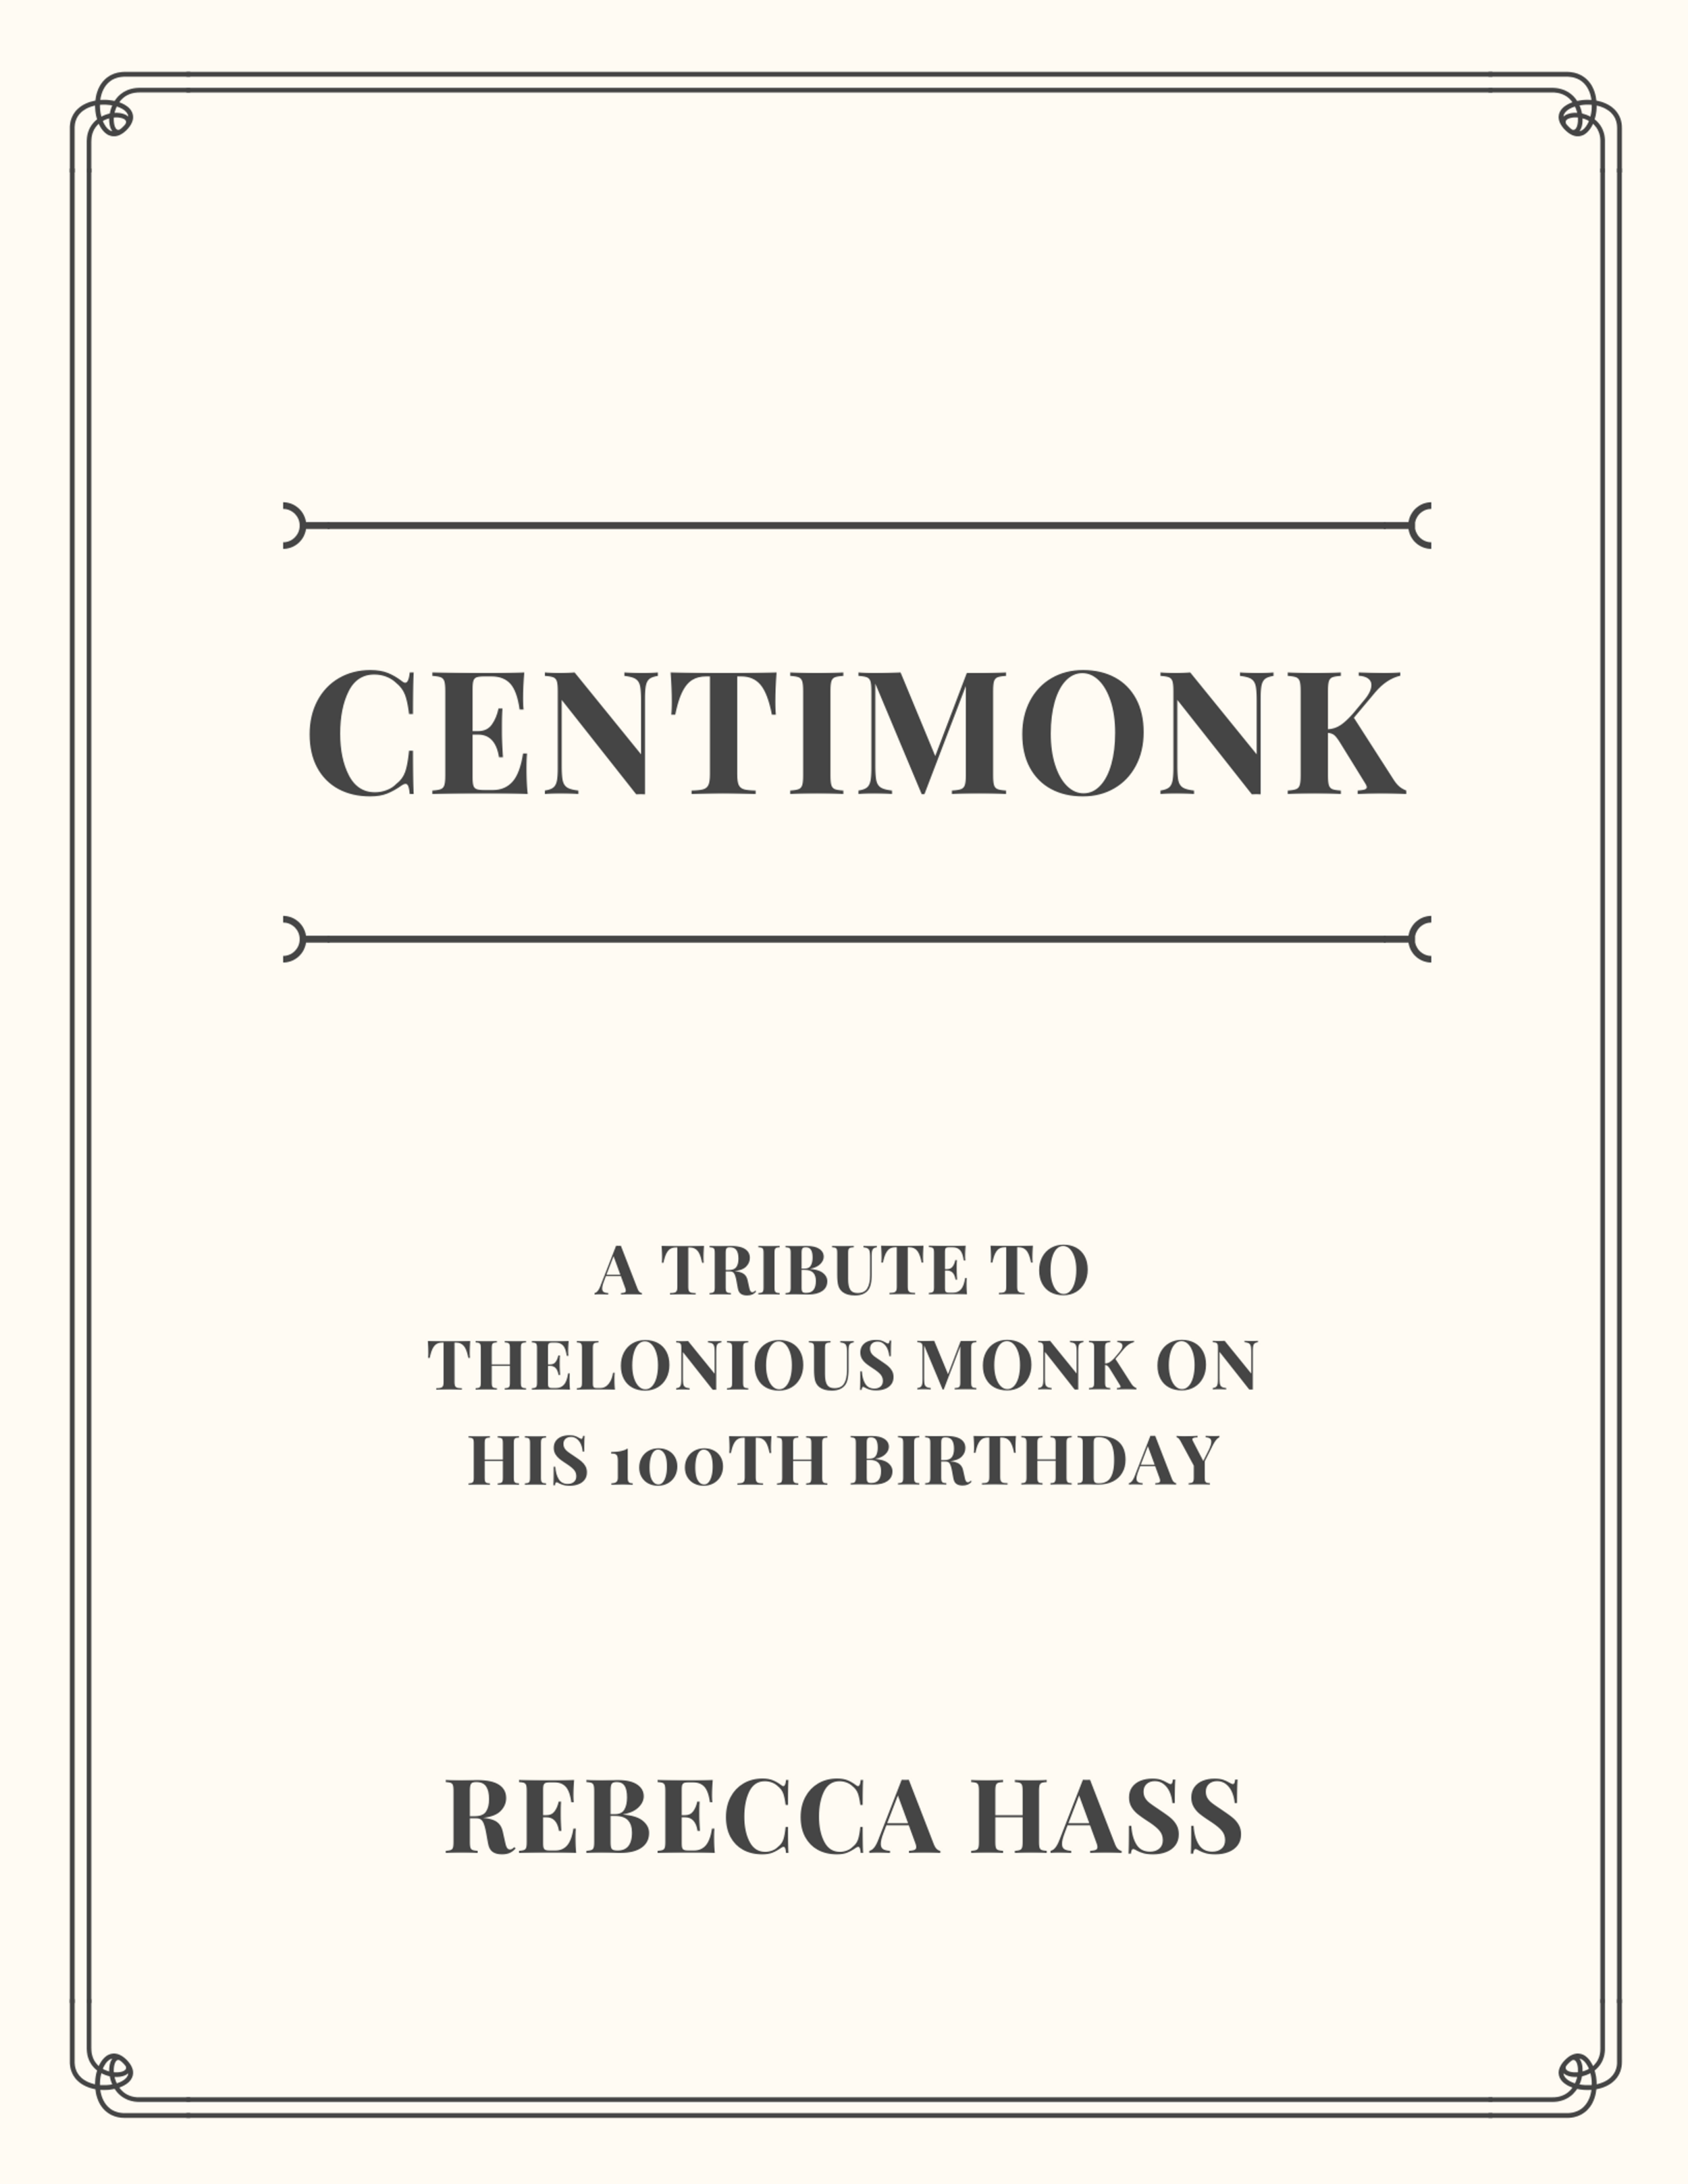 Centimonk title page.png